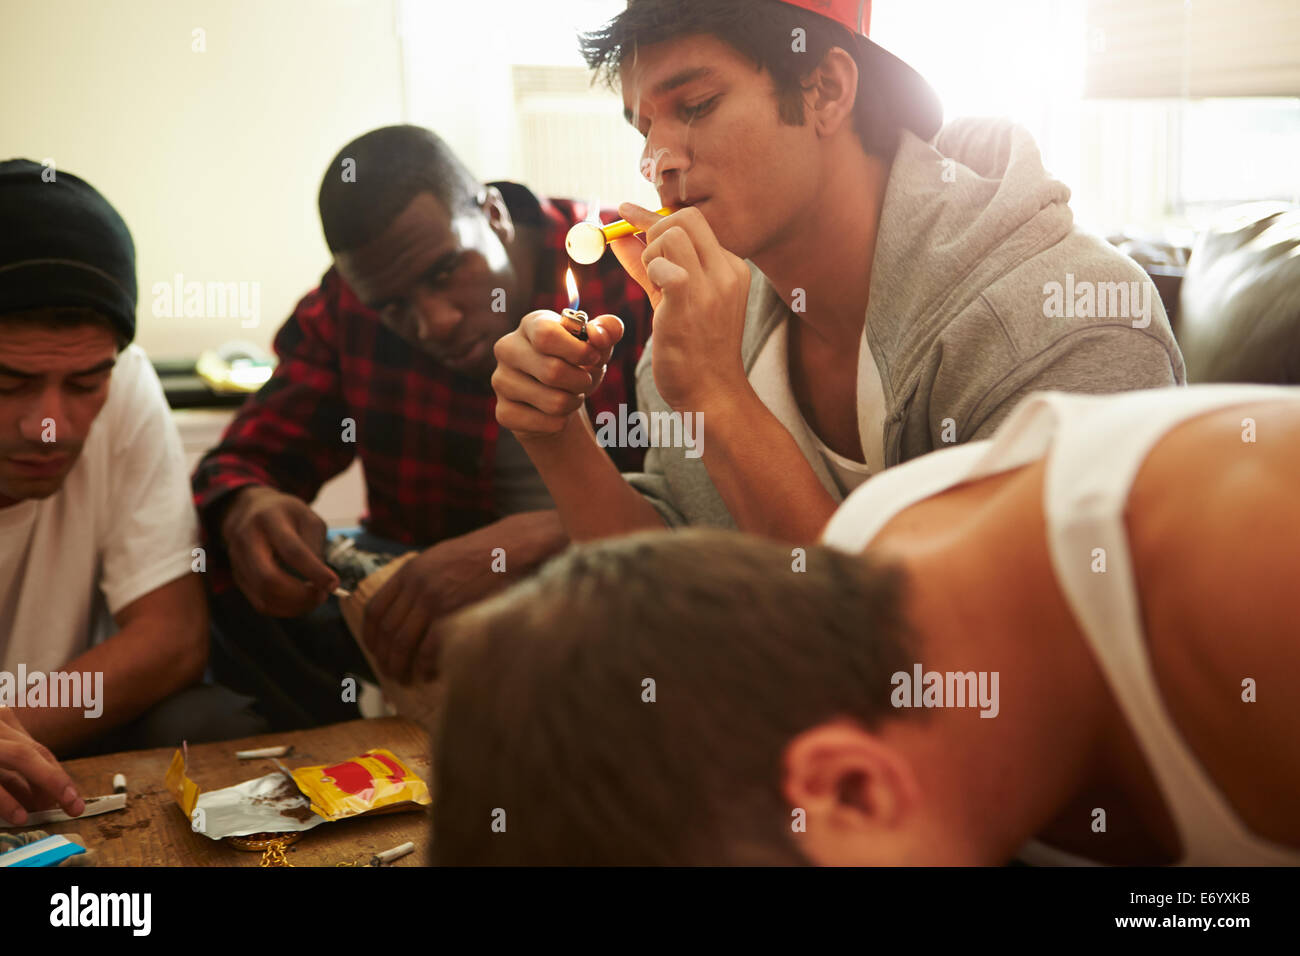 Gang Of Young Men Taking Drugs Indoors Stock Photo